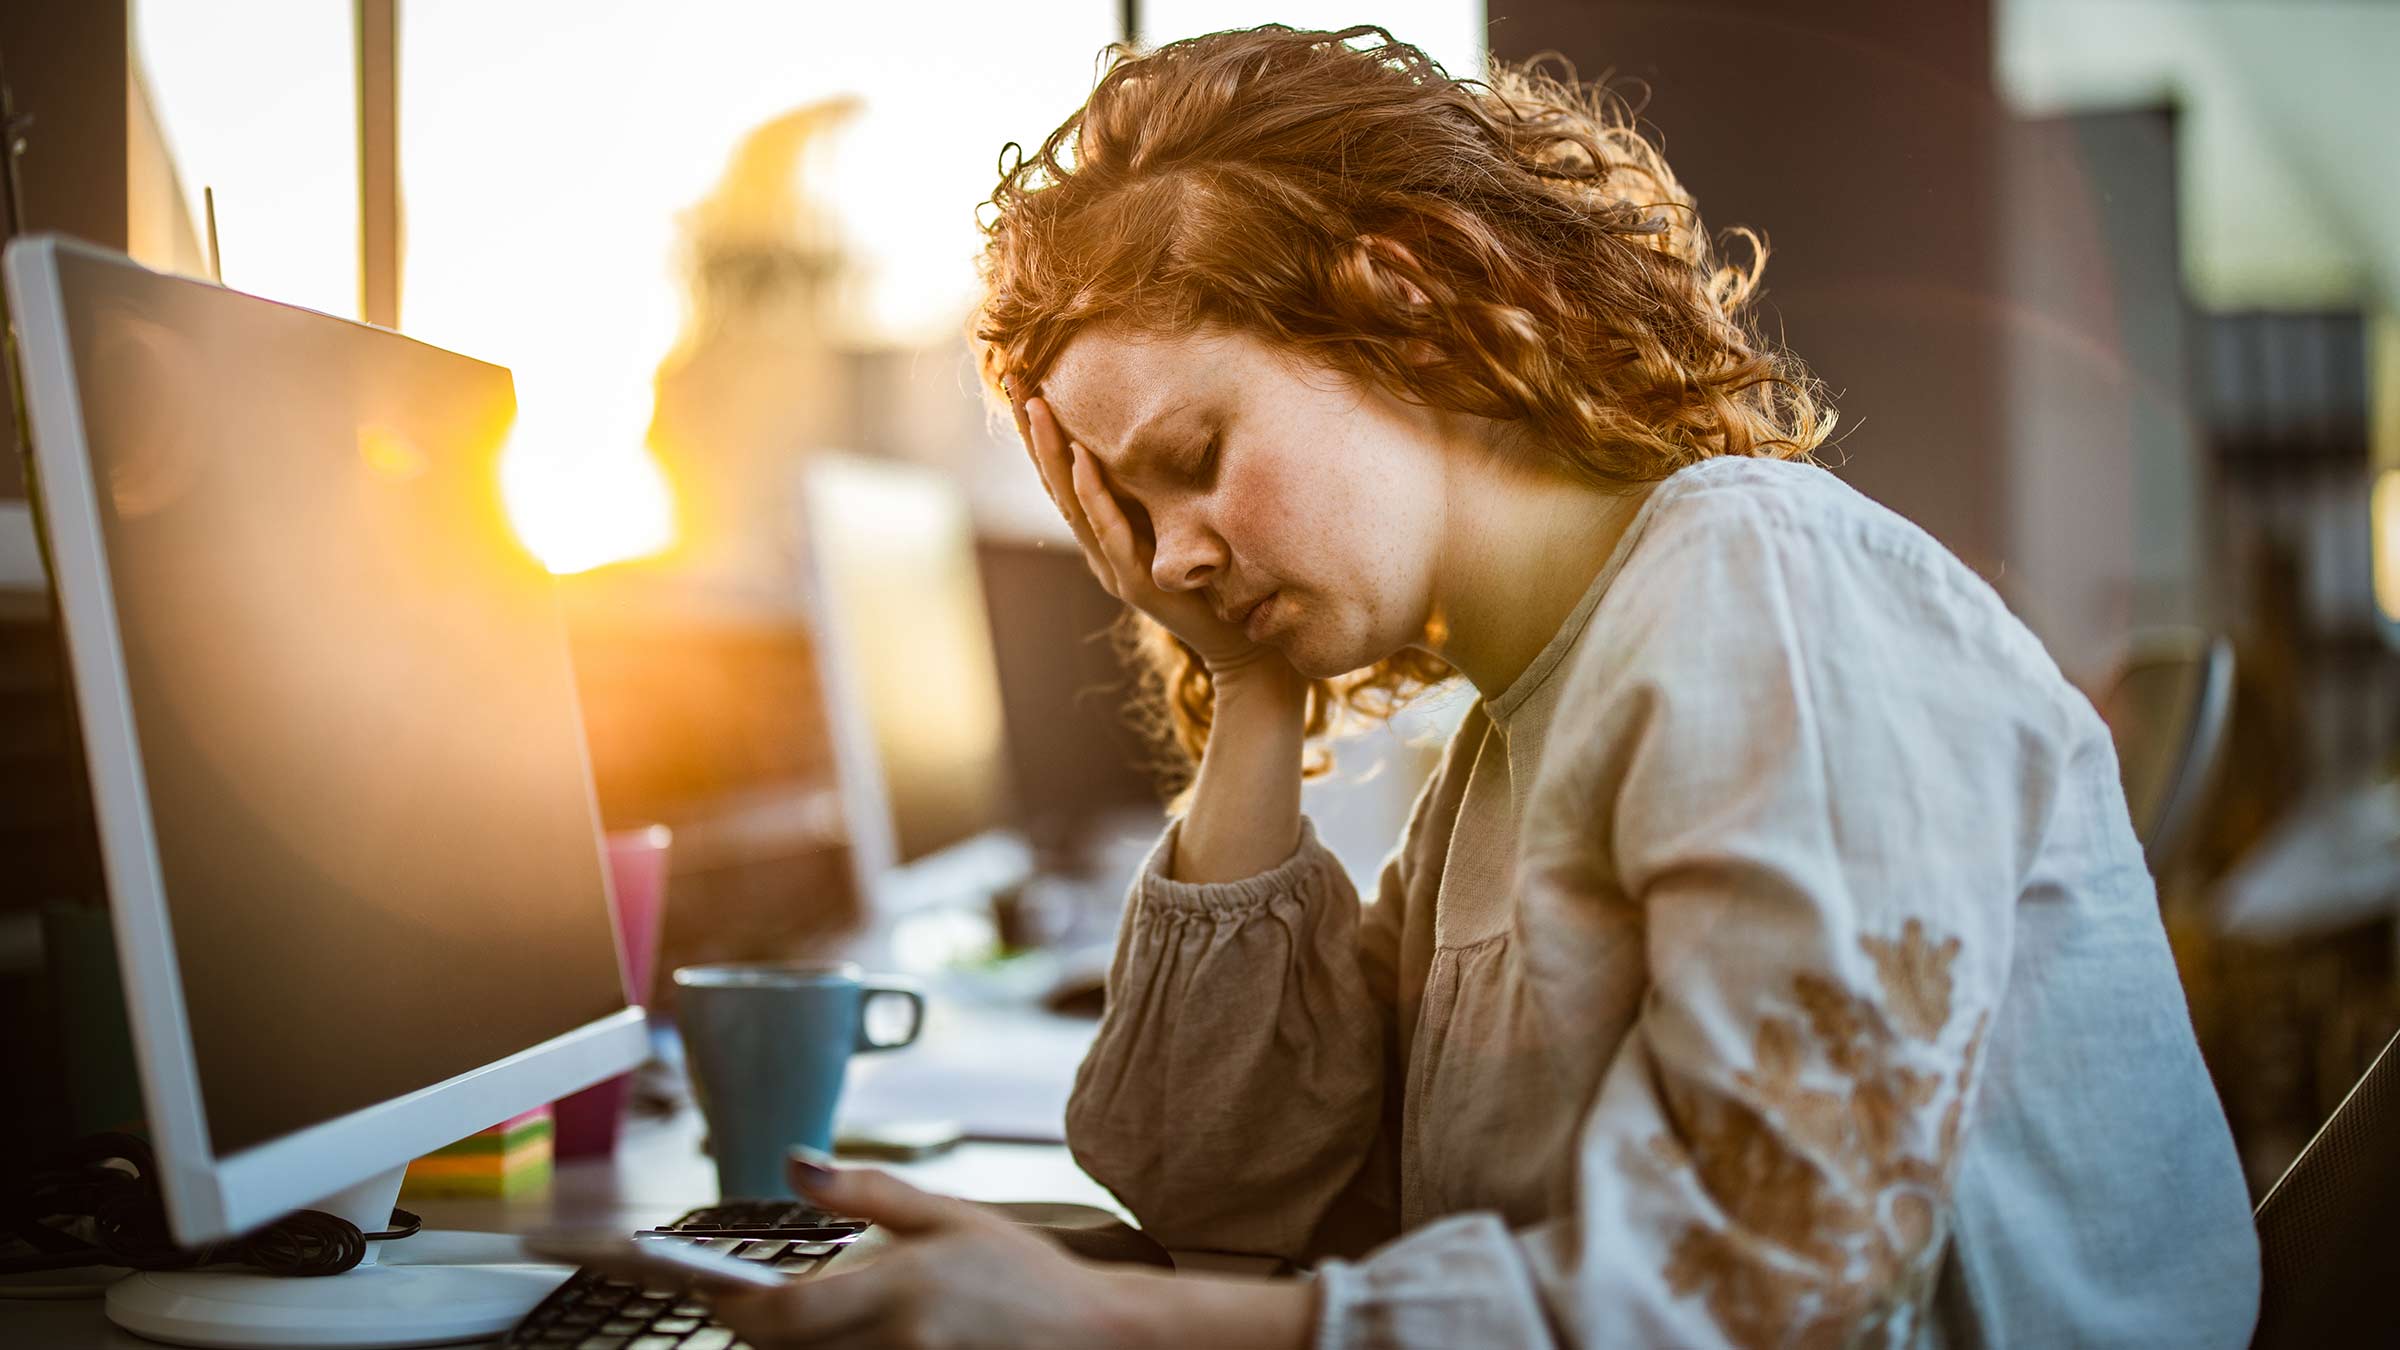 A woman with anemia experiences fatigue at work